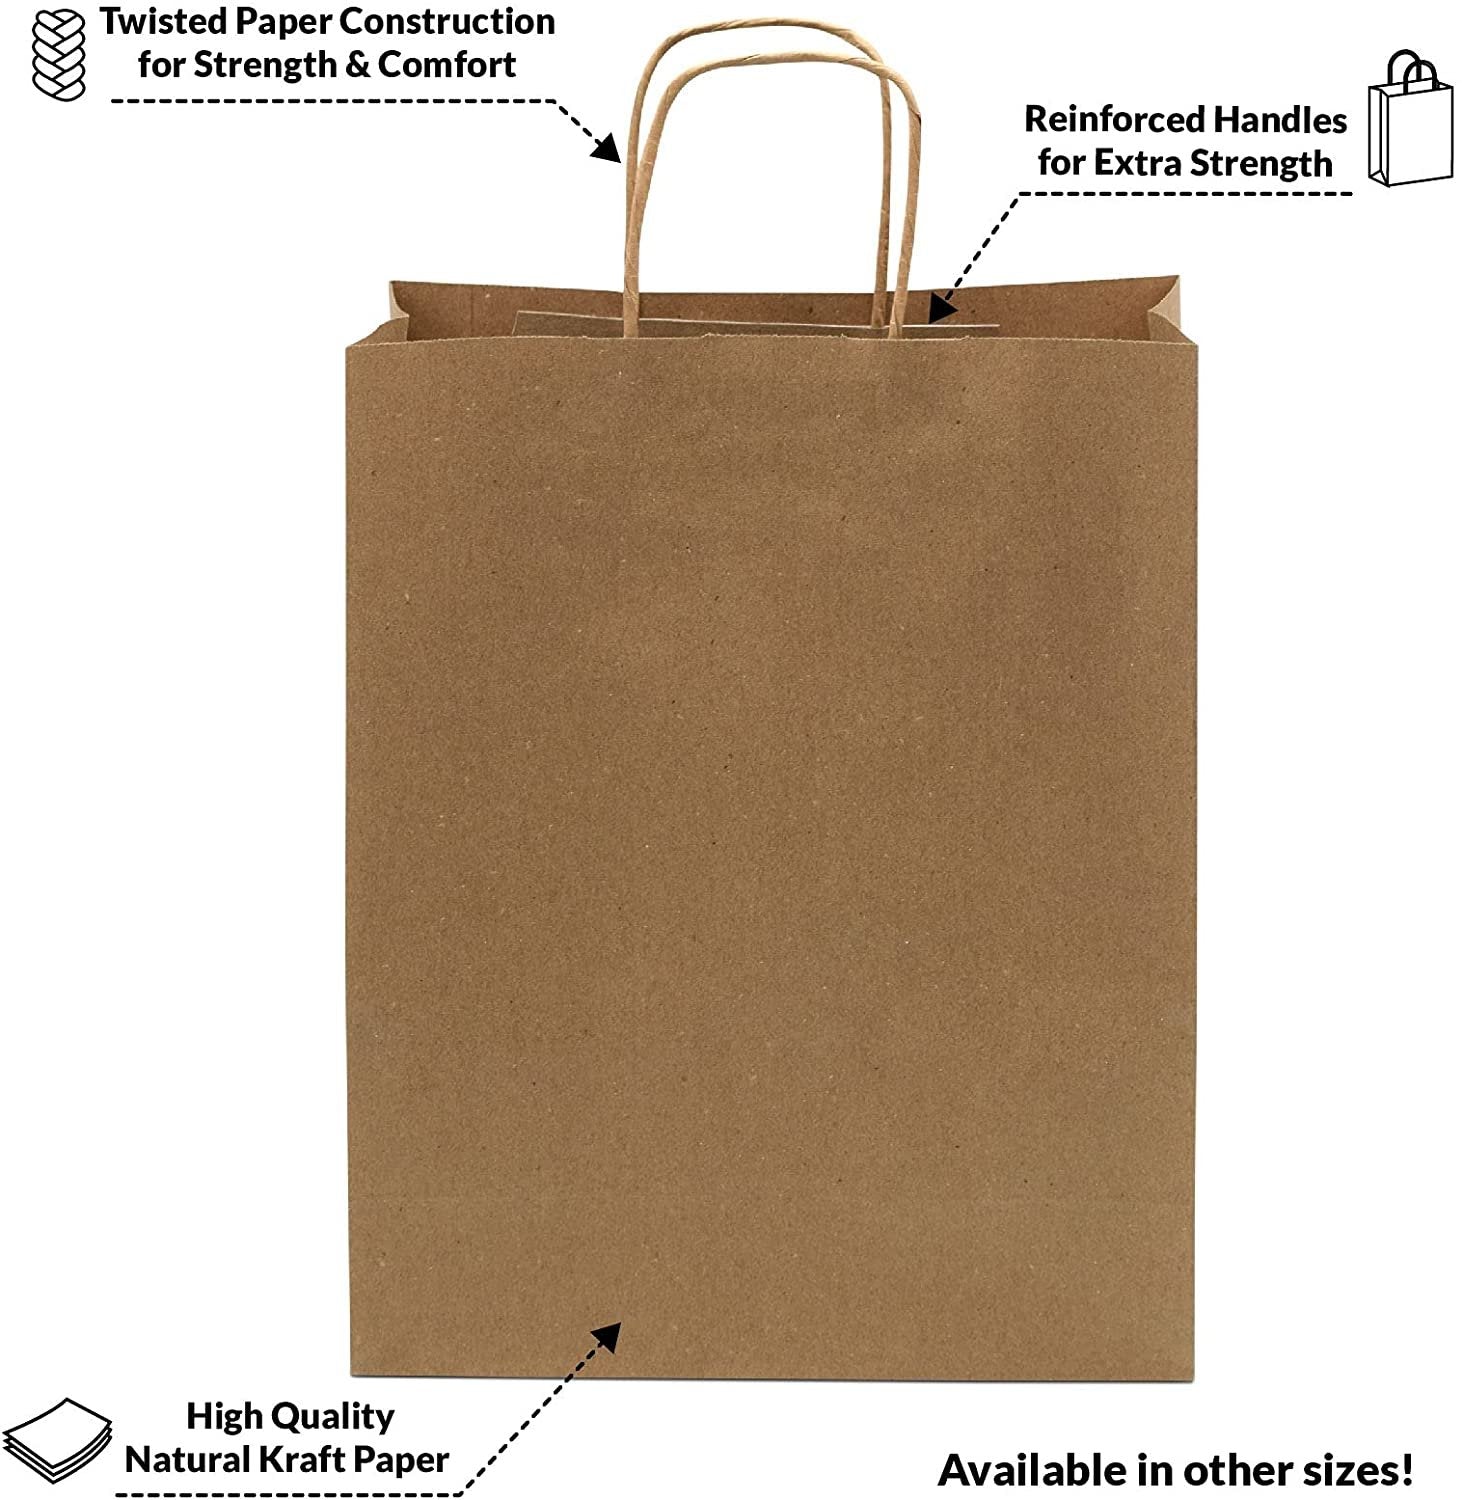 50 Brown Kraft Shopping Bags w/ Handles | 10x5x13 Inch Size | Bulk for Boutiques, Retail Stores, Birthdays, Party Favors & Merchandise